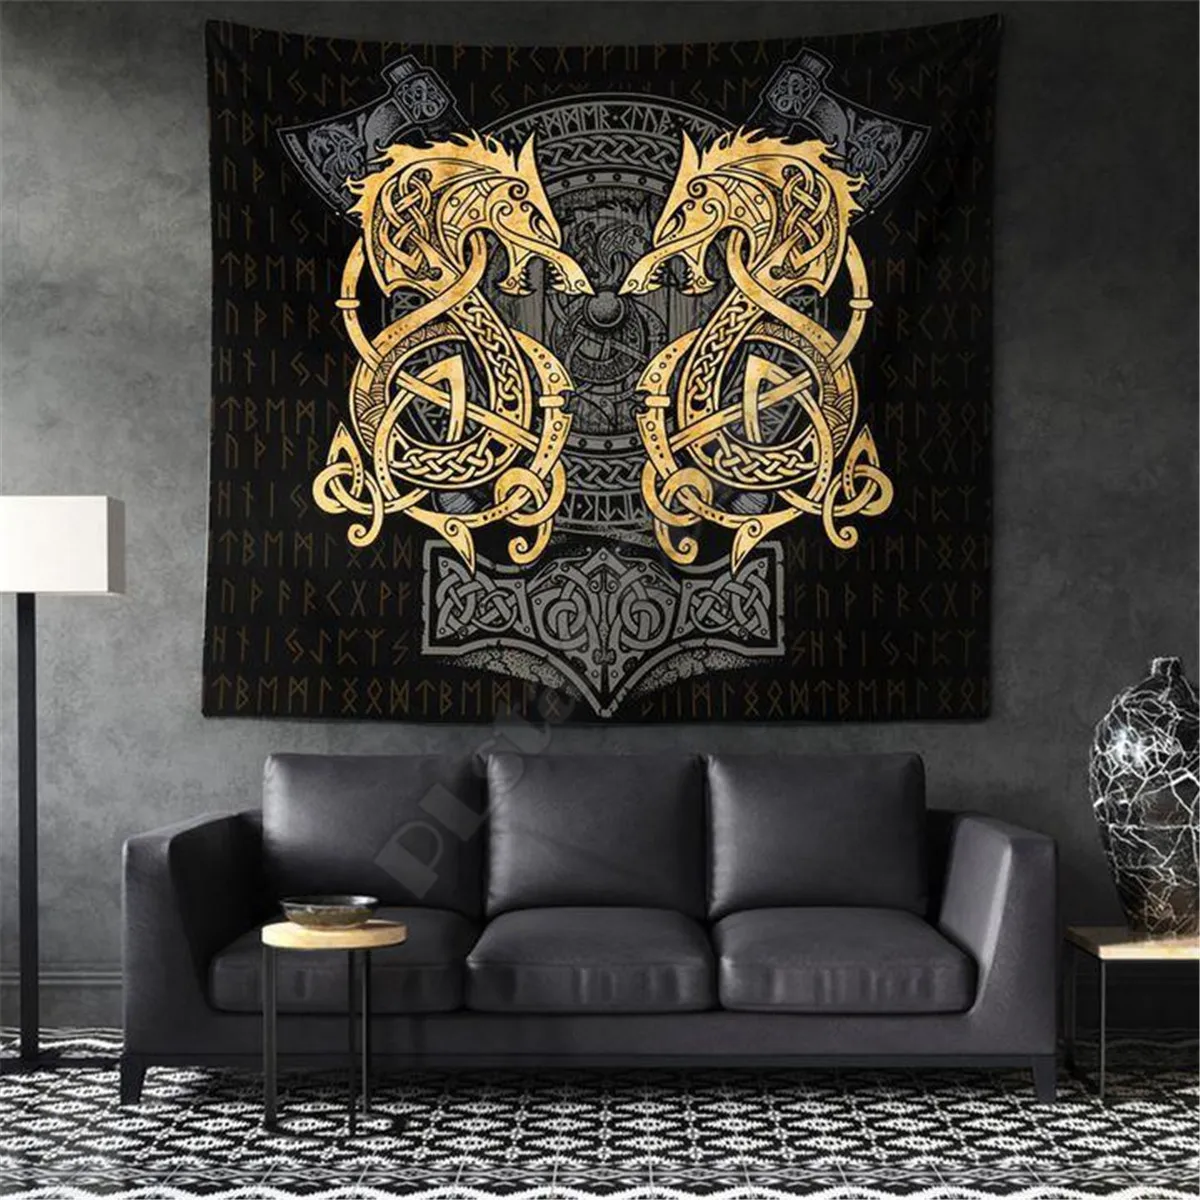 

Viking Legend Warrior Limited 3D Print Wall Tapestry Rectangular Home Decor Wall Hanging Home Decoration